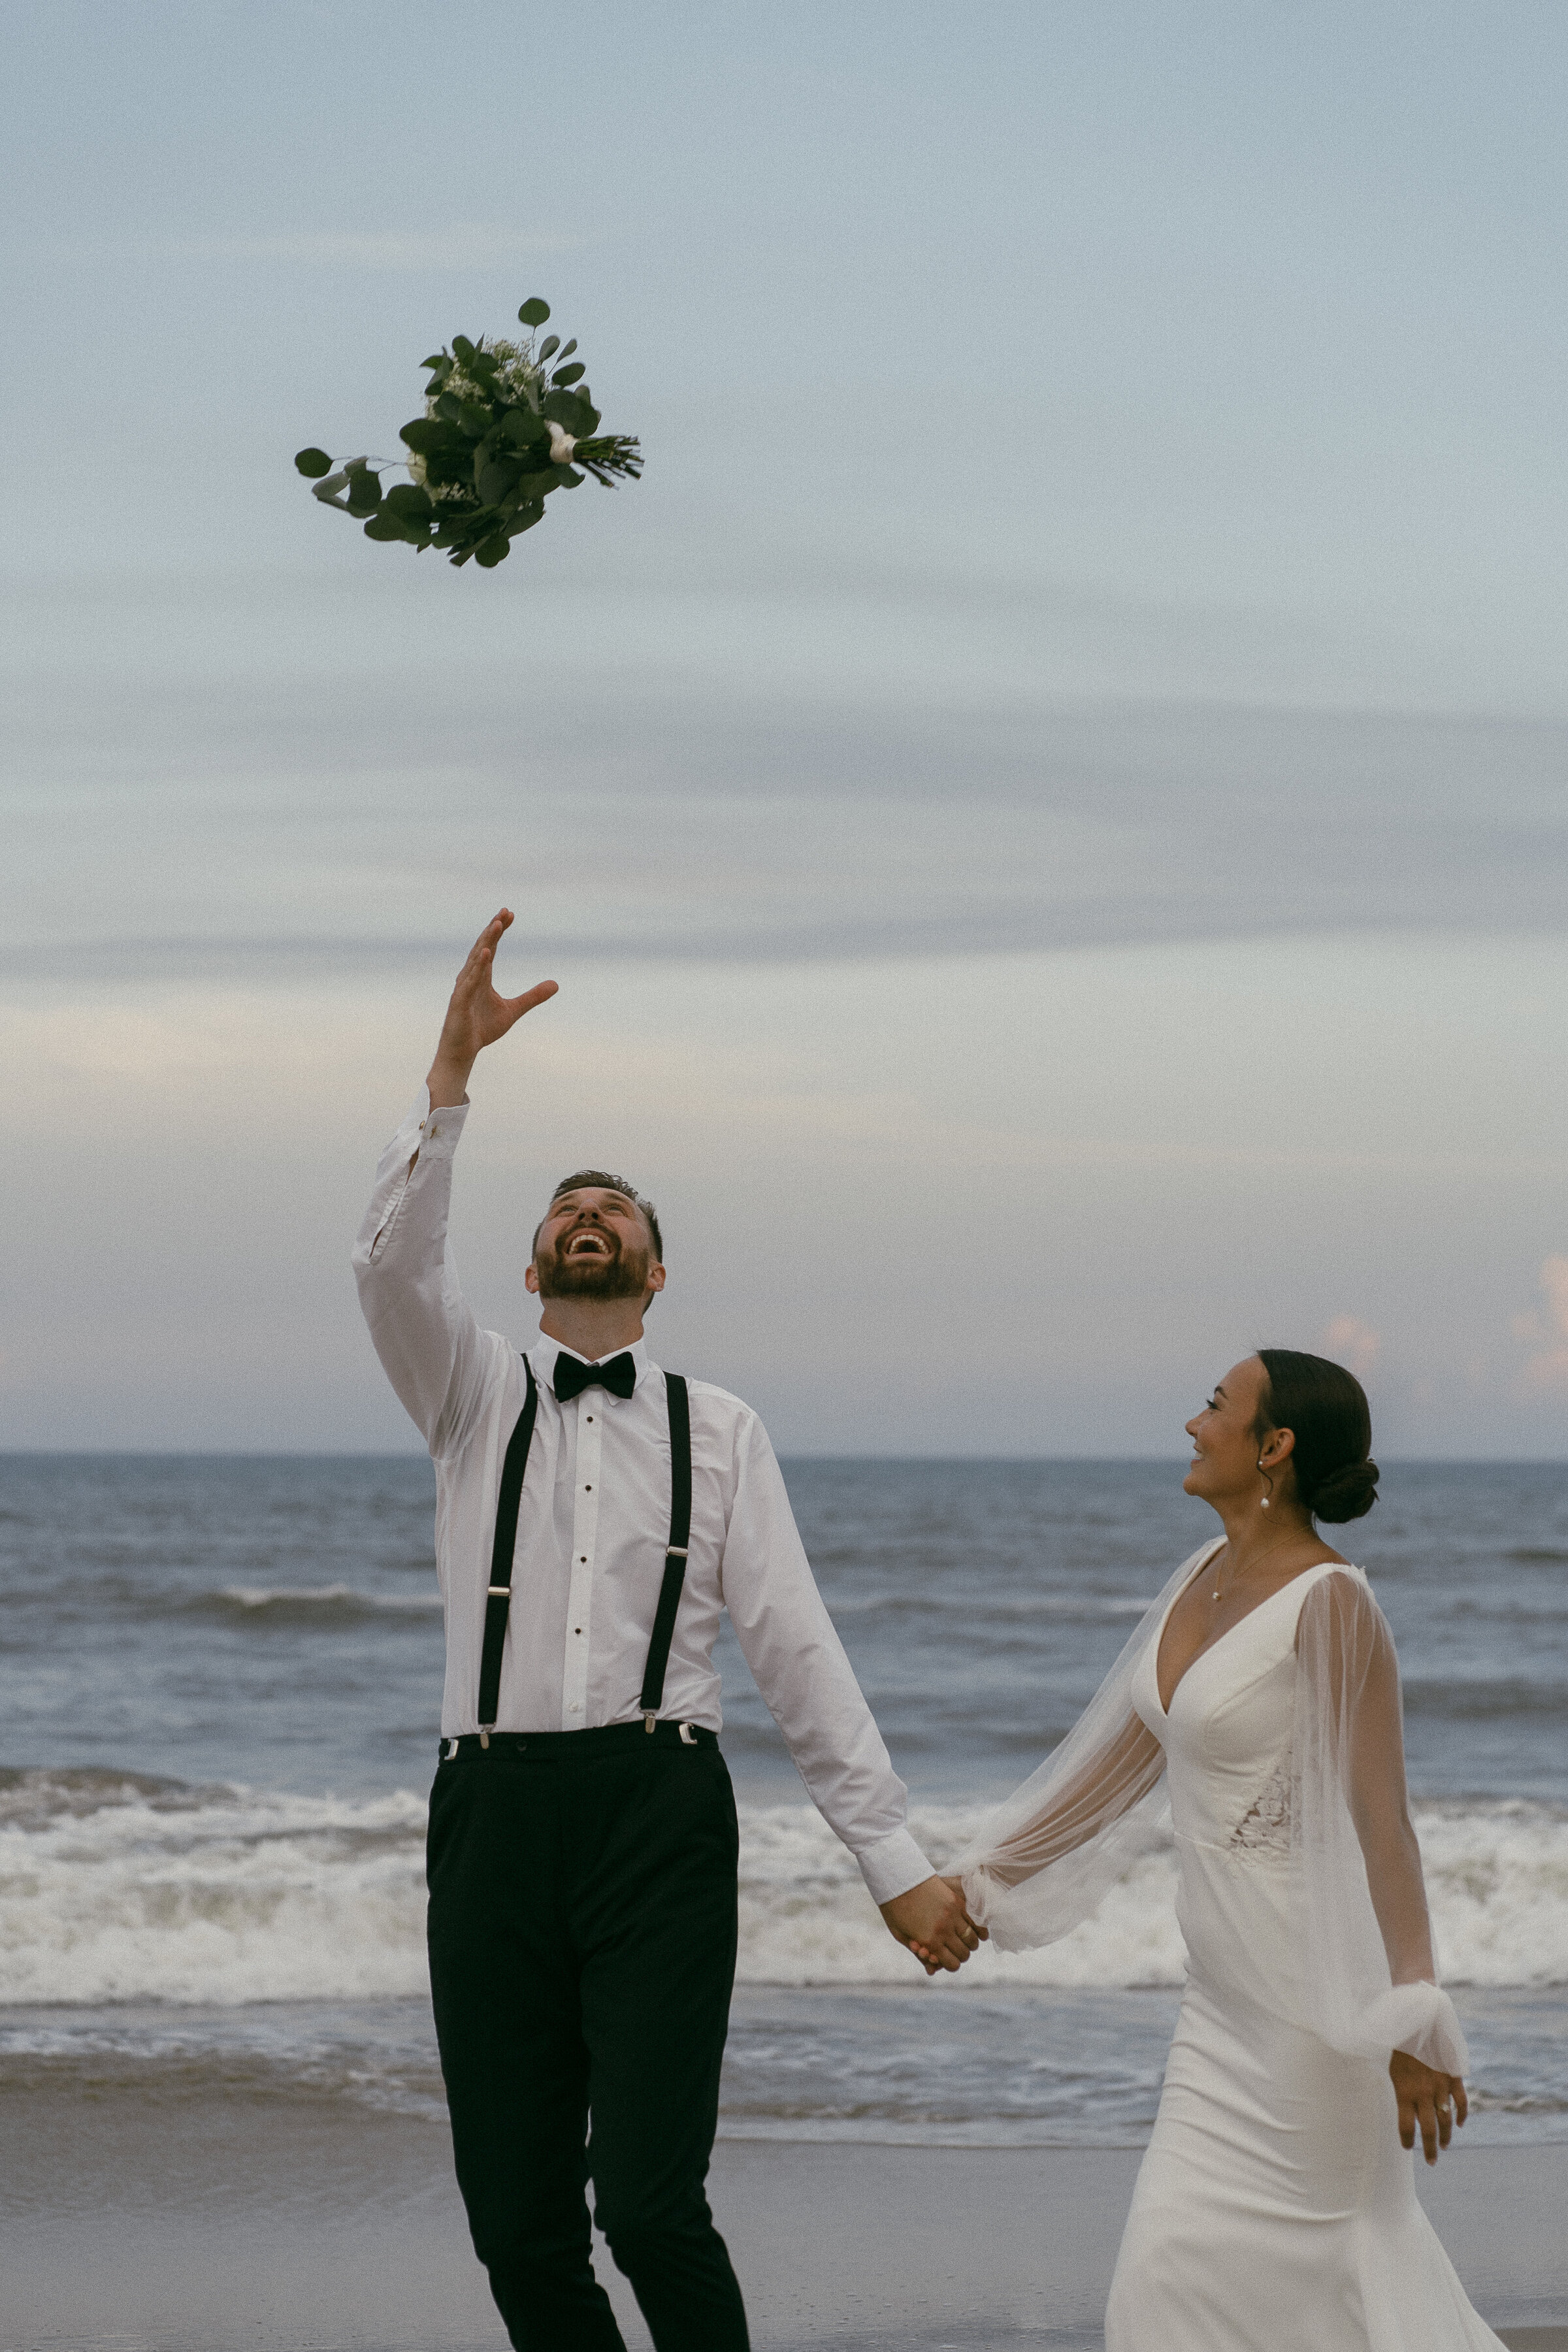 Groom tossing a bouquet into the air beside the bride on the beach.